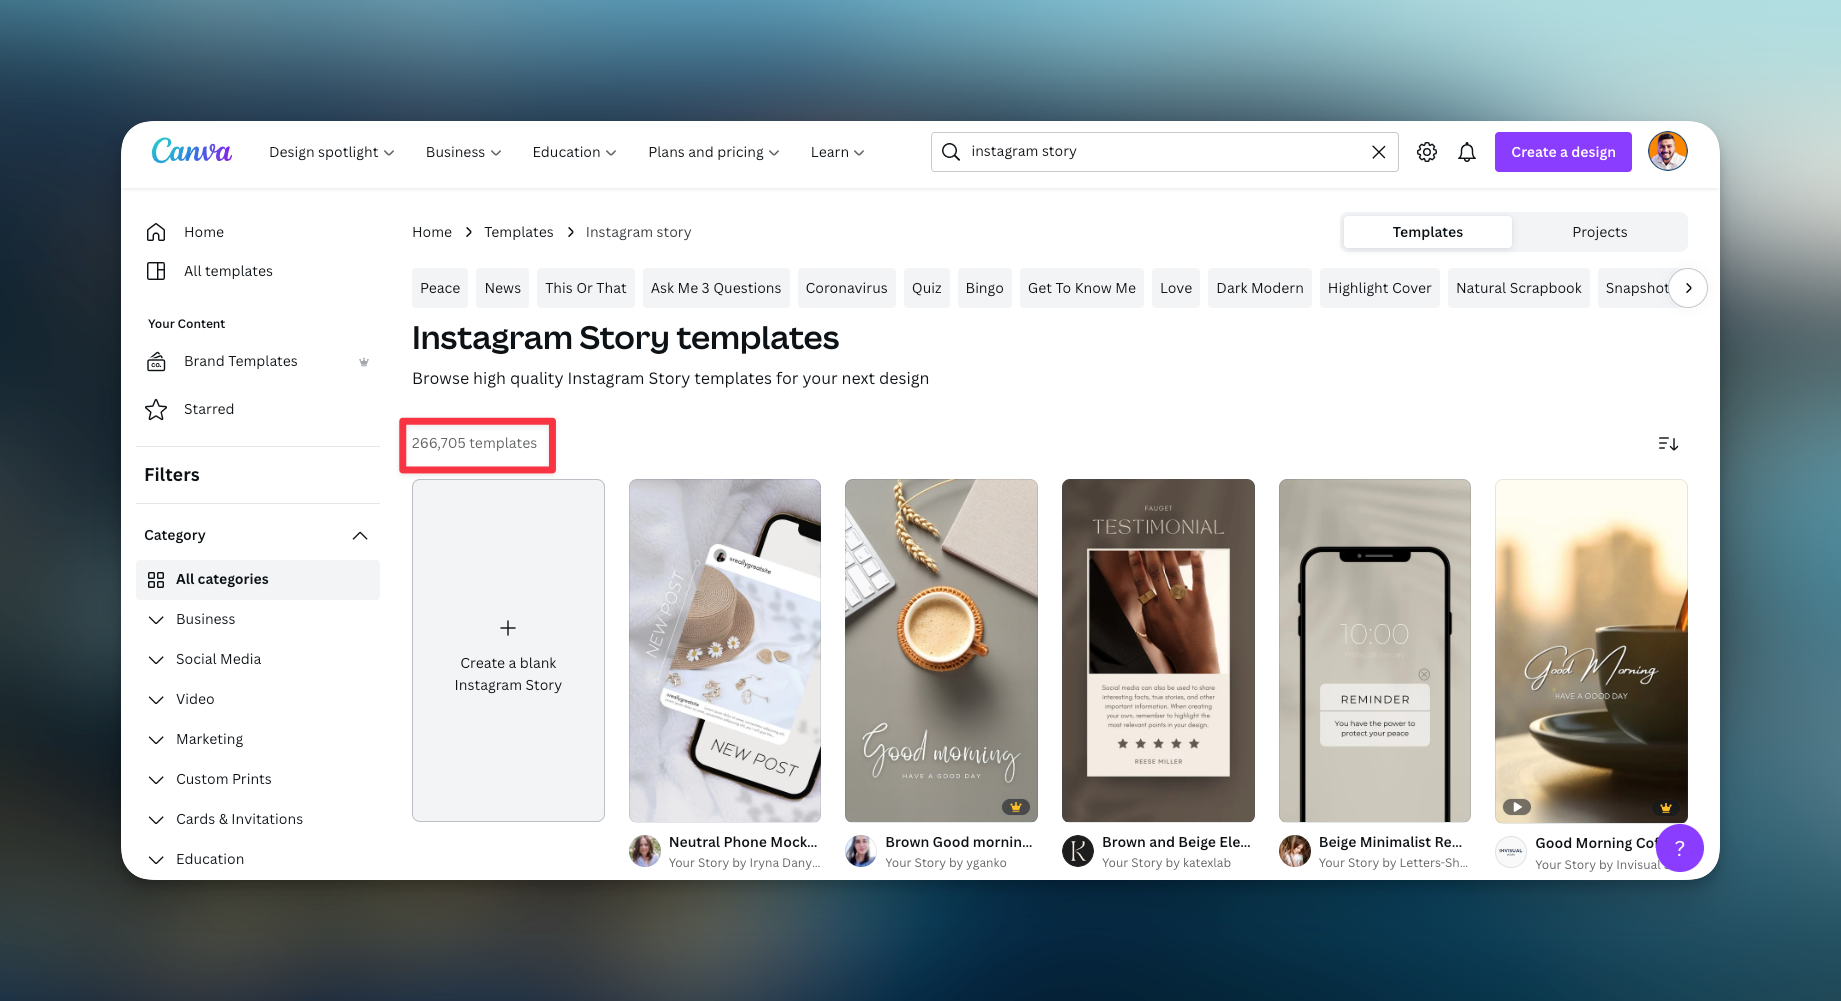 Remote.tools shows to create Instagram stories with music on canva